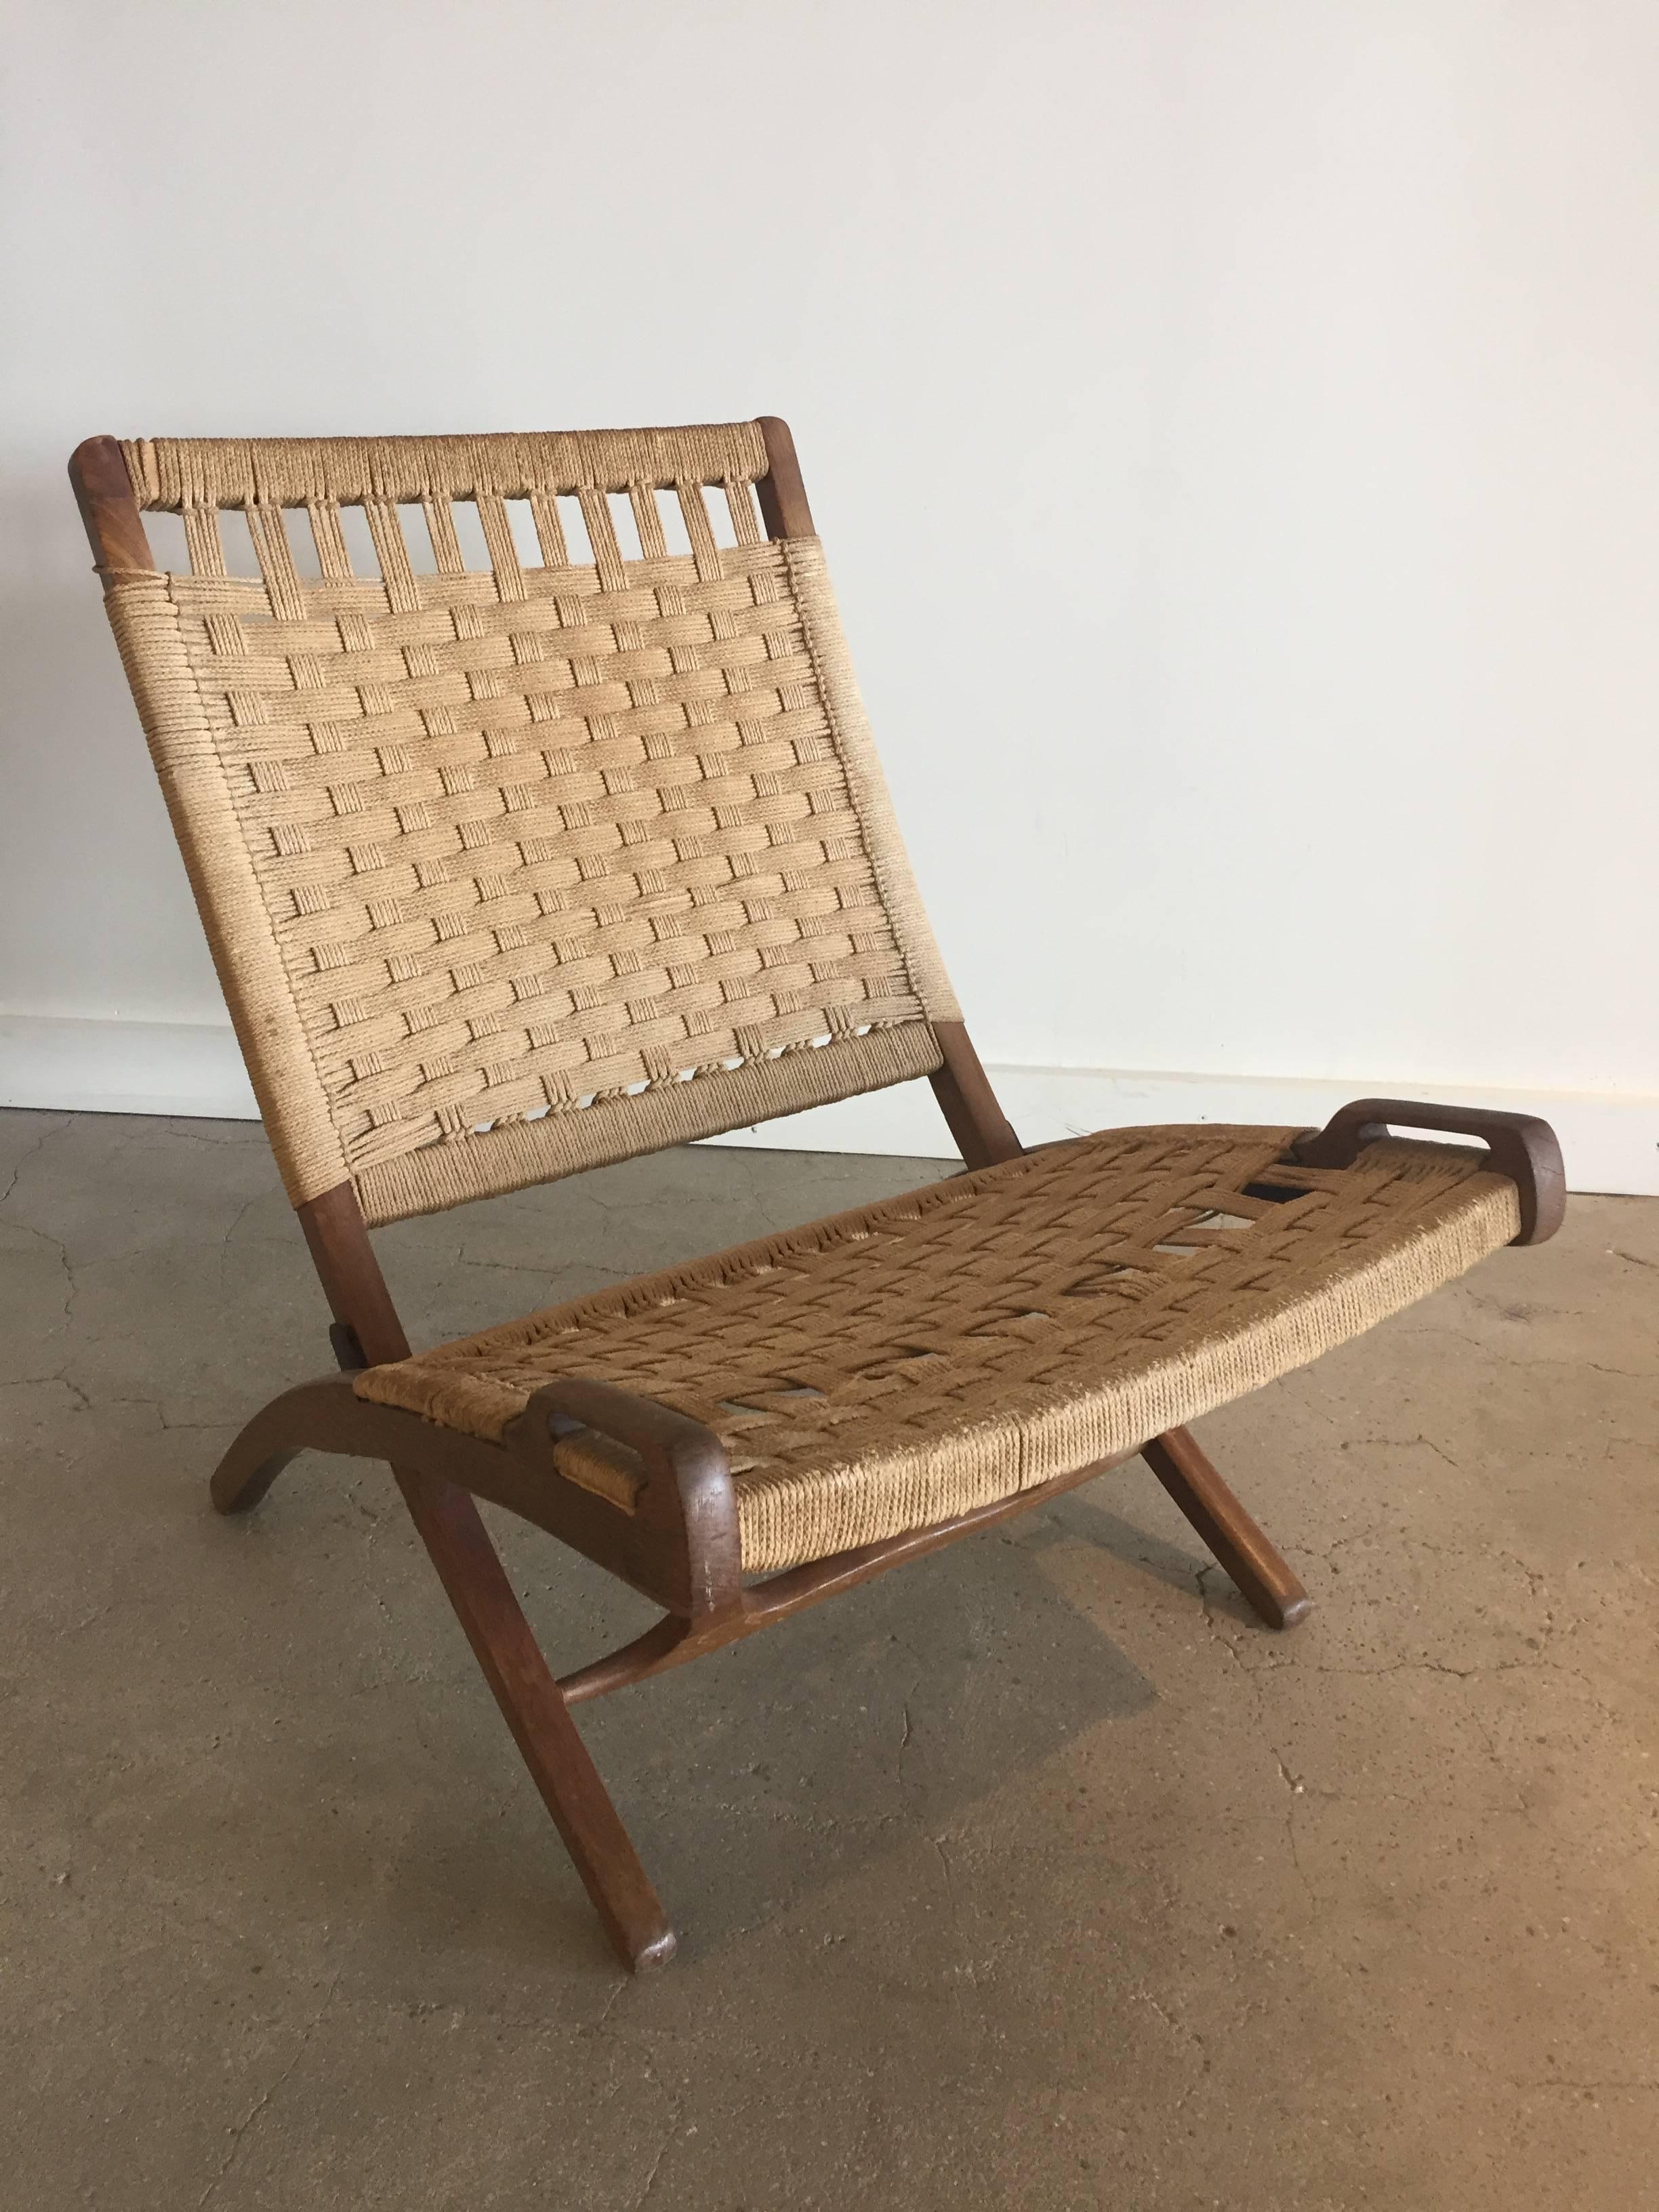 Mid-Century Hans Wegner style folding chair, around 1960, teak wood with weaving. The wood and structure of the chair is in very good condition. The weaving shows some signs of usage on the seat.